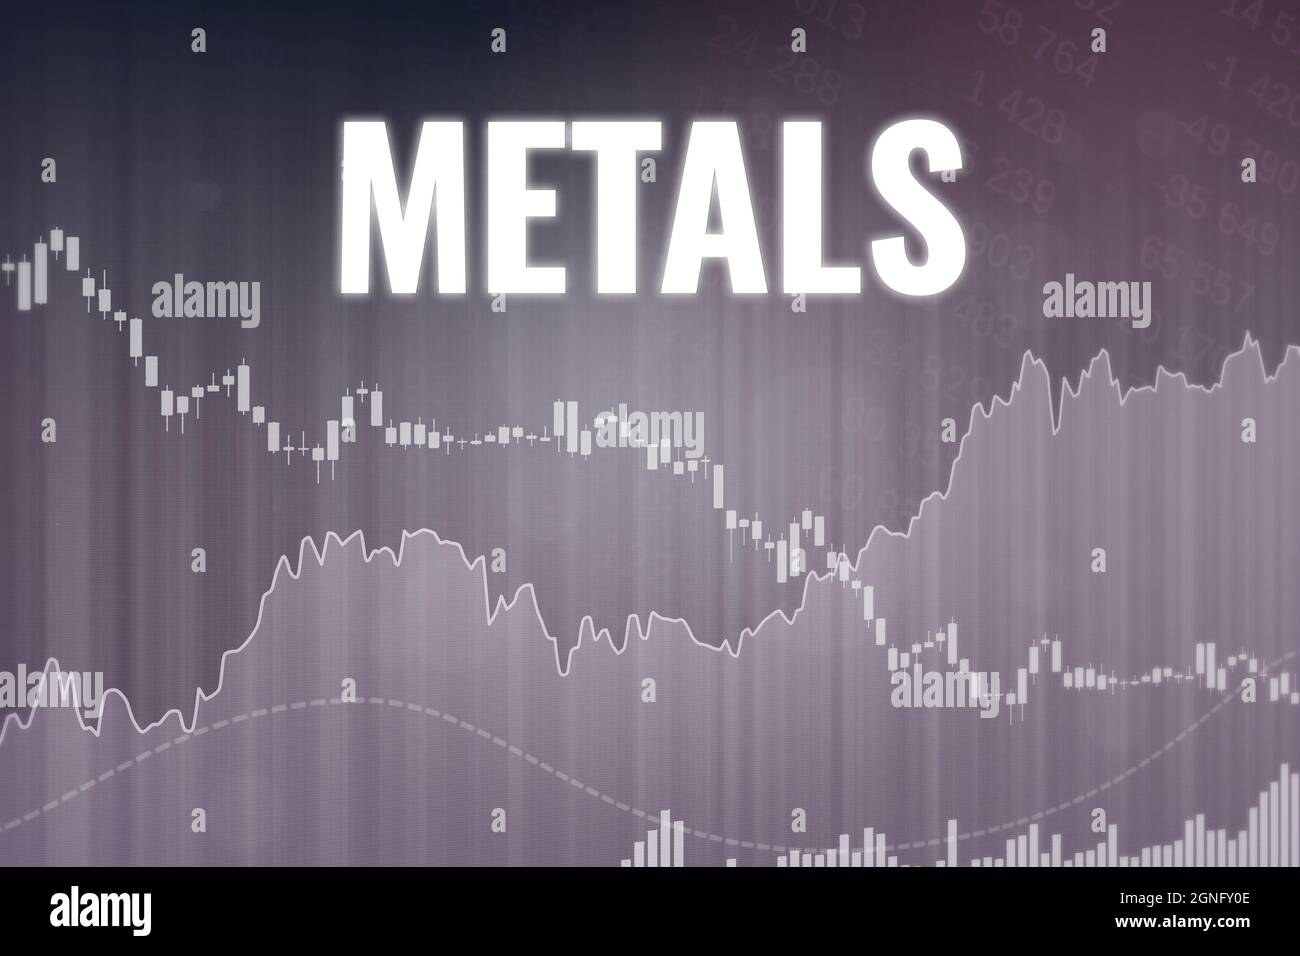 Financial market sector Metals on dark gray finance background from graphs, charts. Trend Up and Down. 3D render. Financial market concept Stock Photo